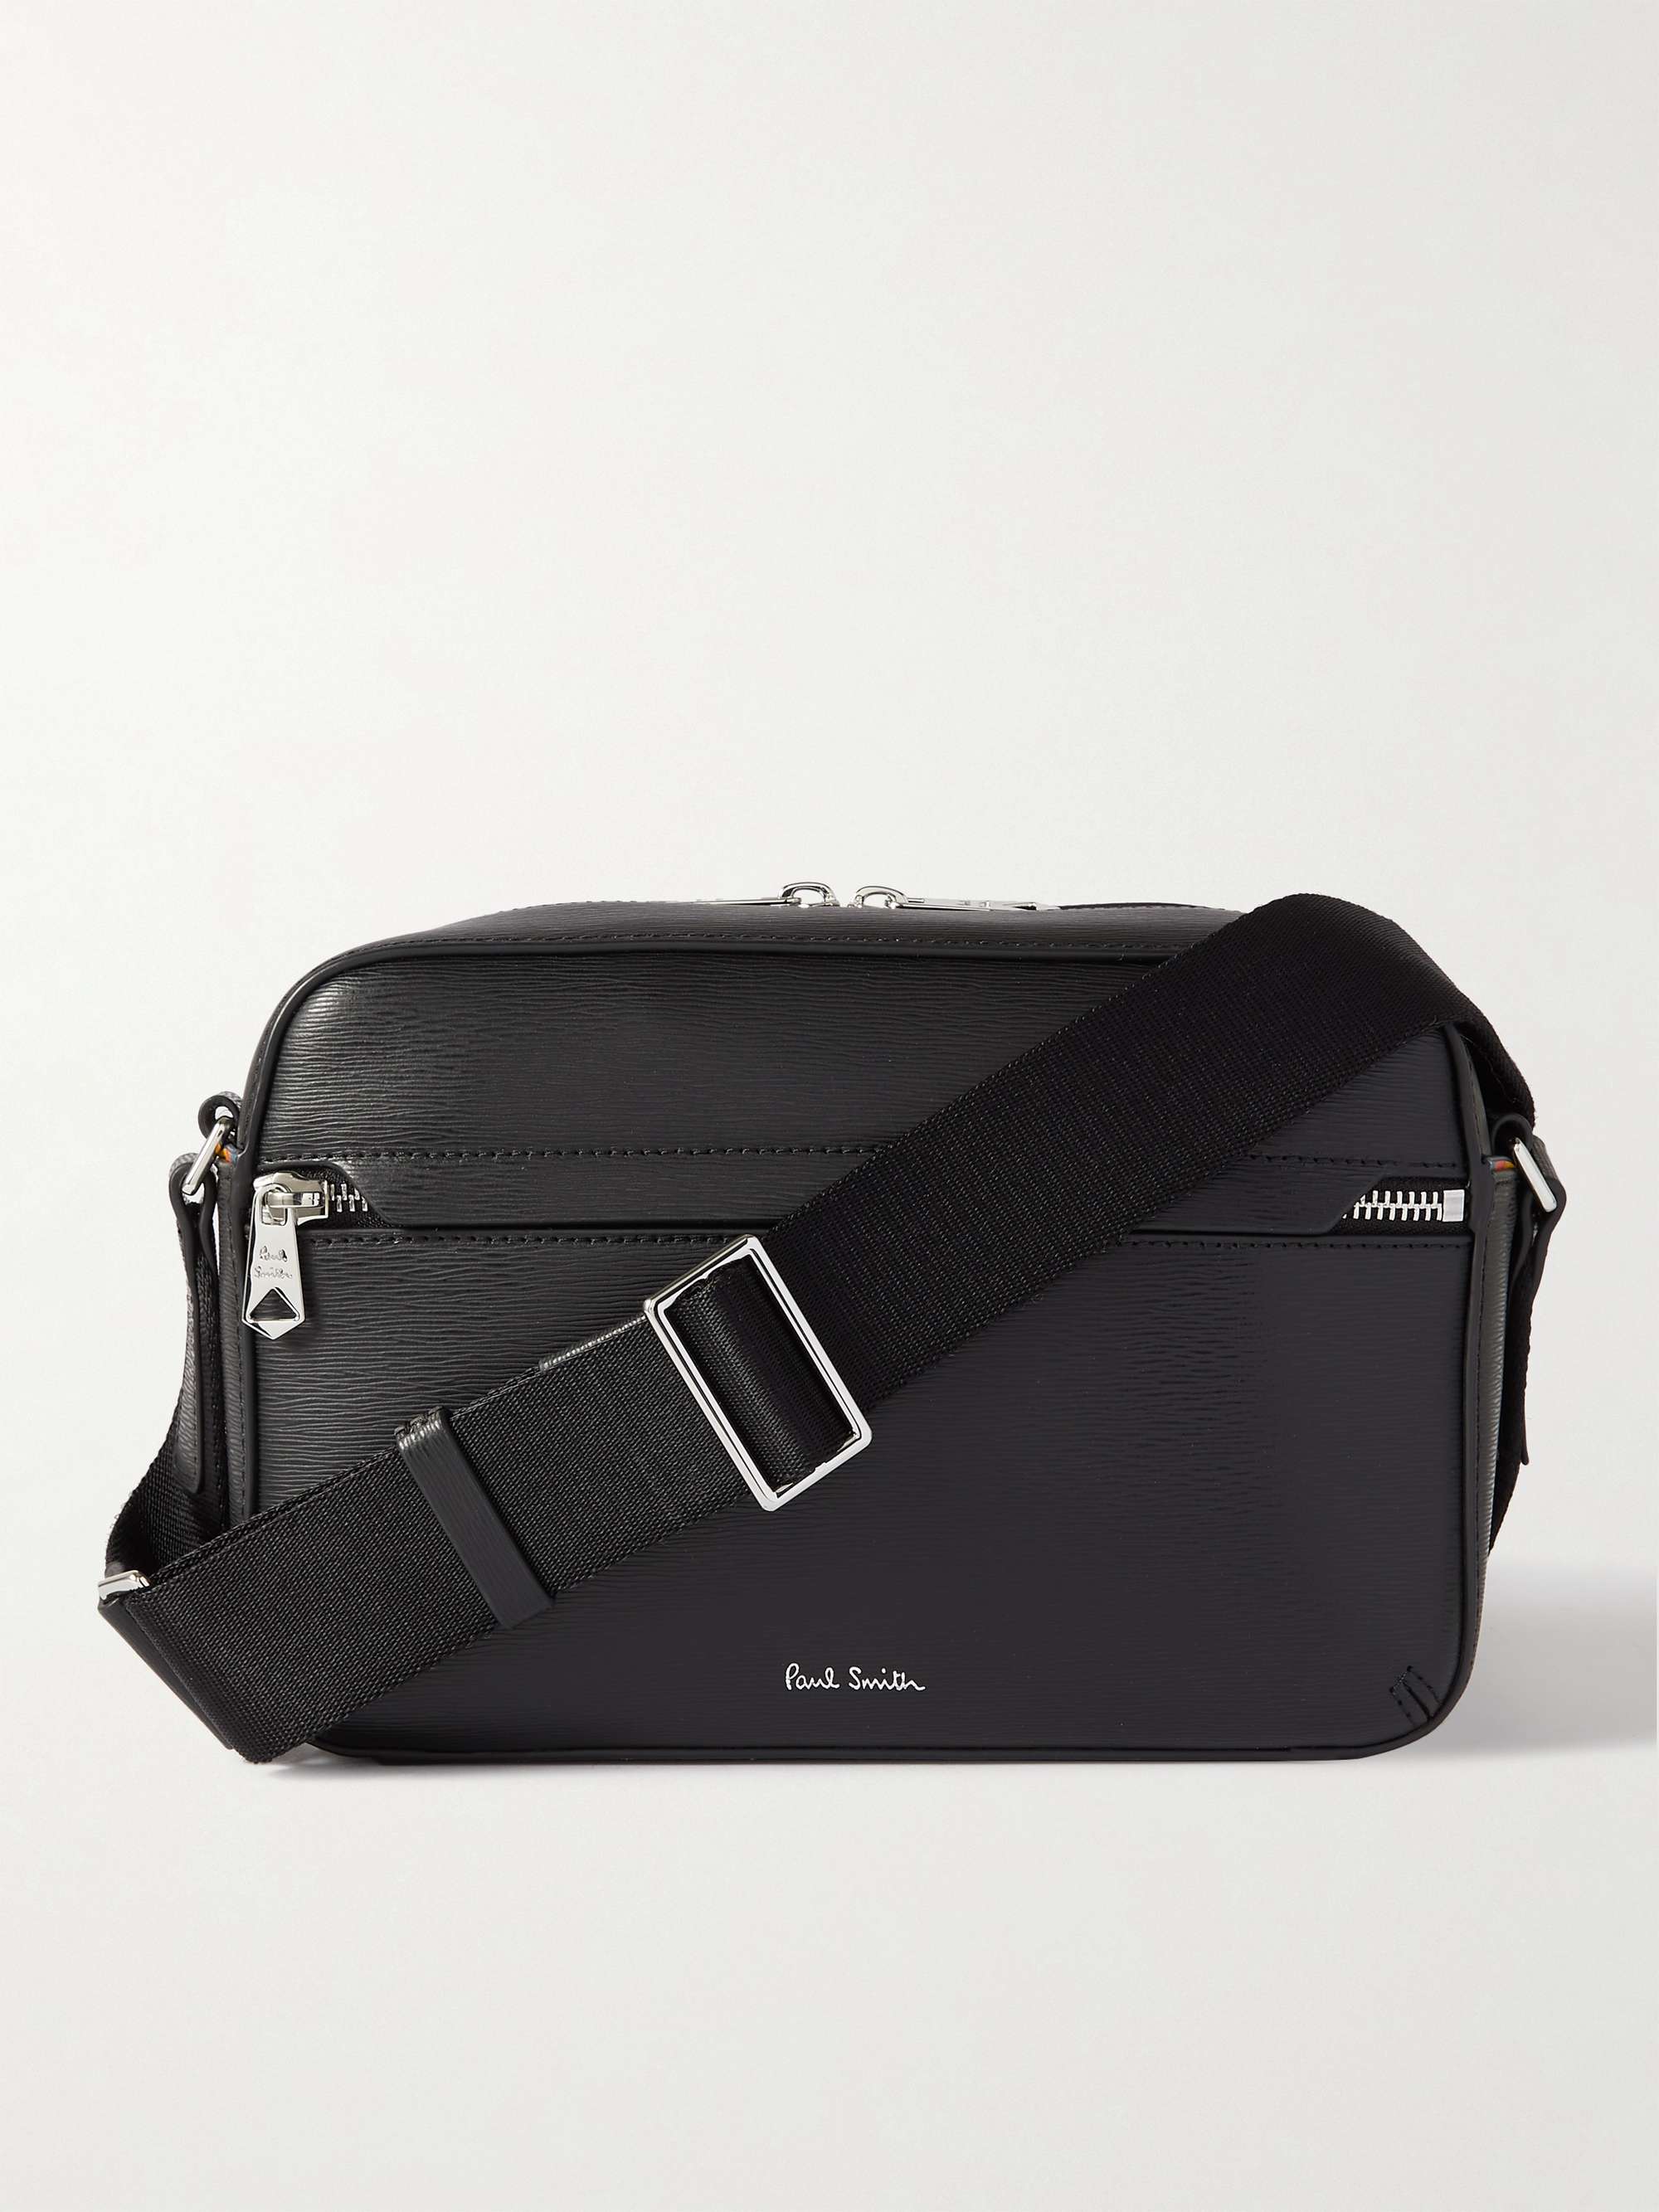 PAUL SMITH Textured-Leather Messenger Bag